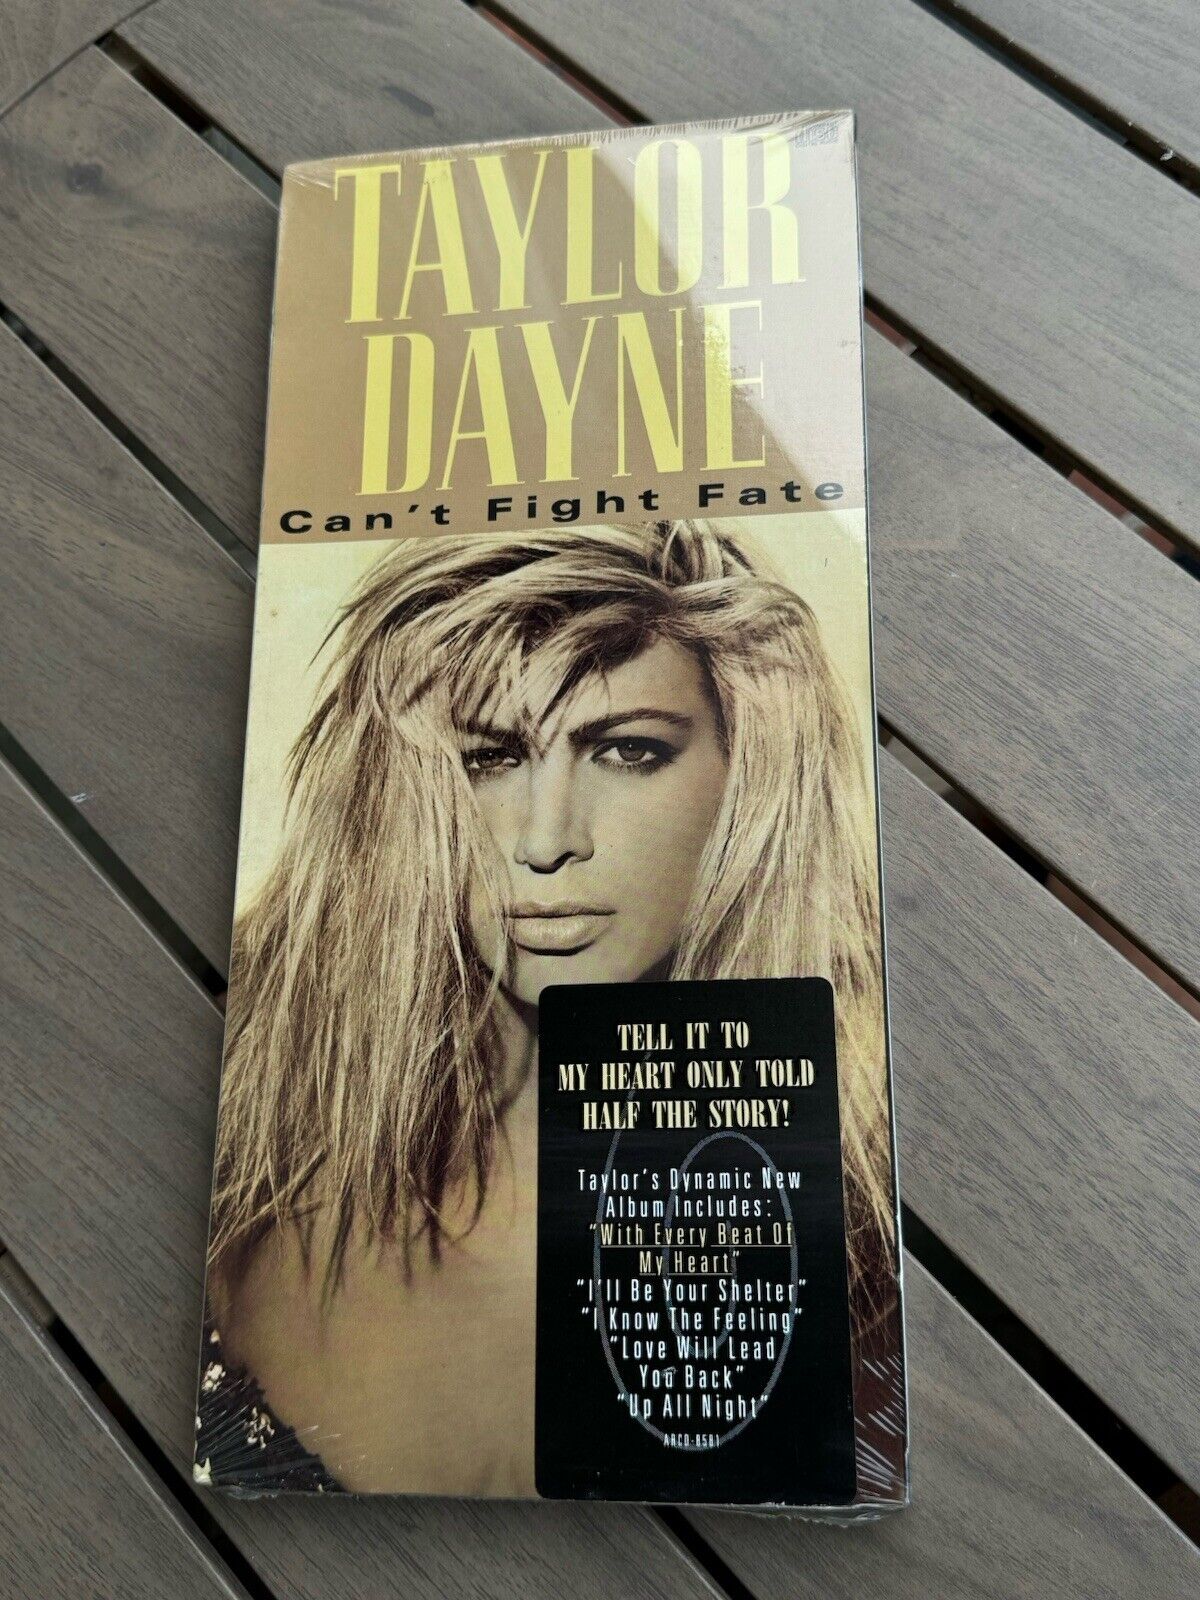 Taylor Dayne CAN\'T FIGHT FATE CD LONGBOX HYPE STICKER Brand New Factory Sealed